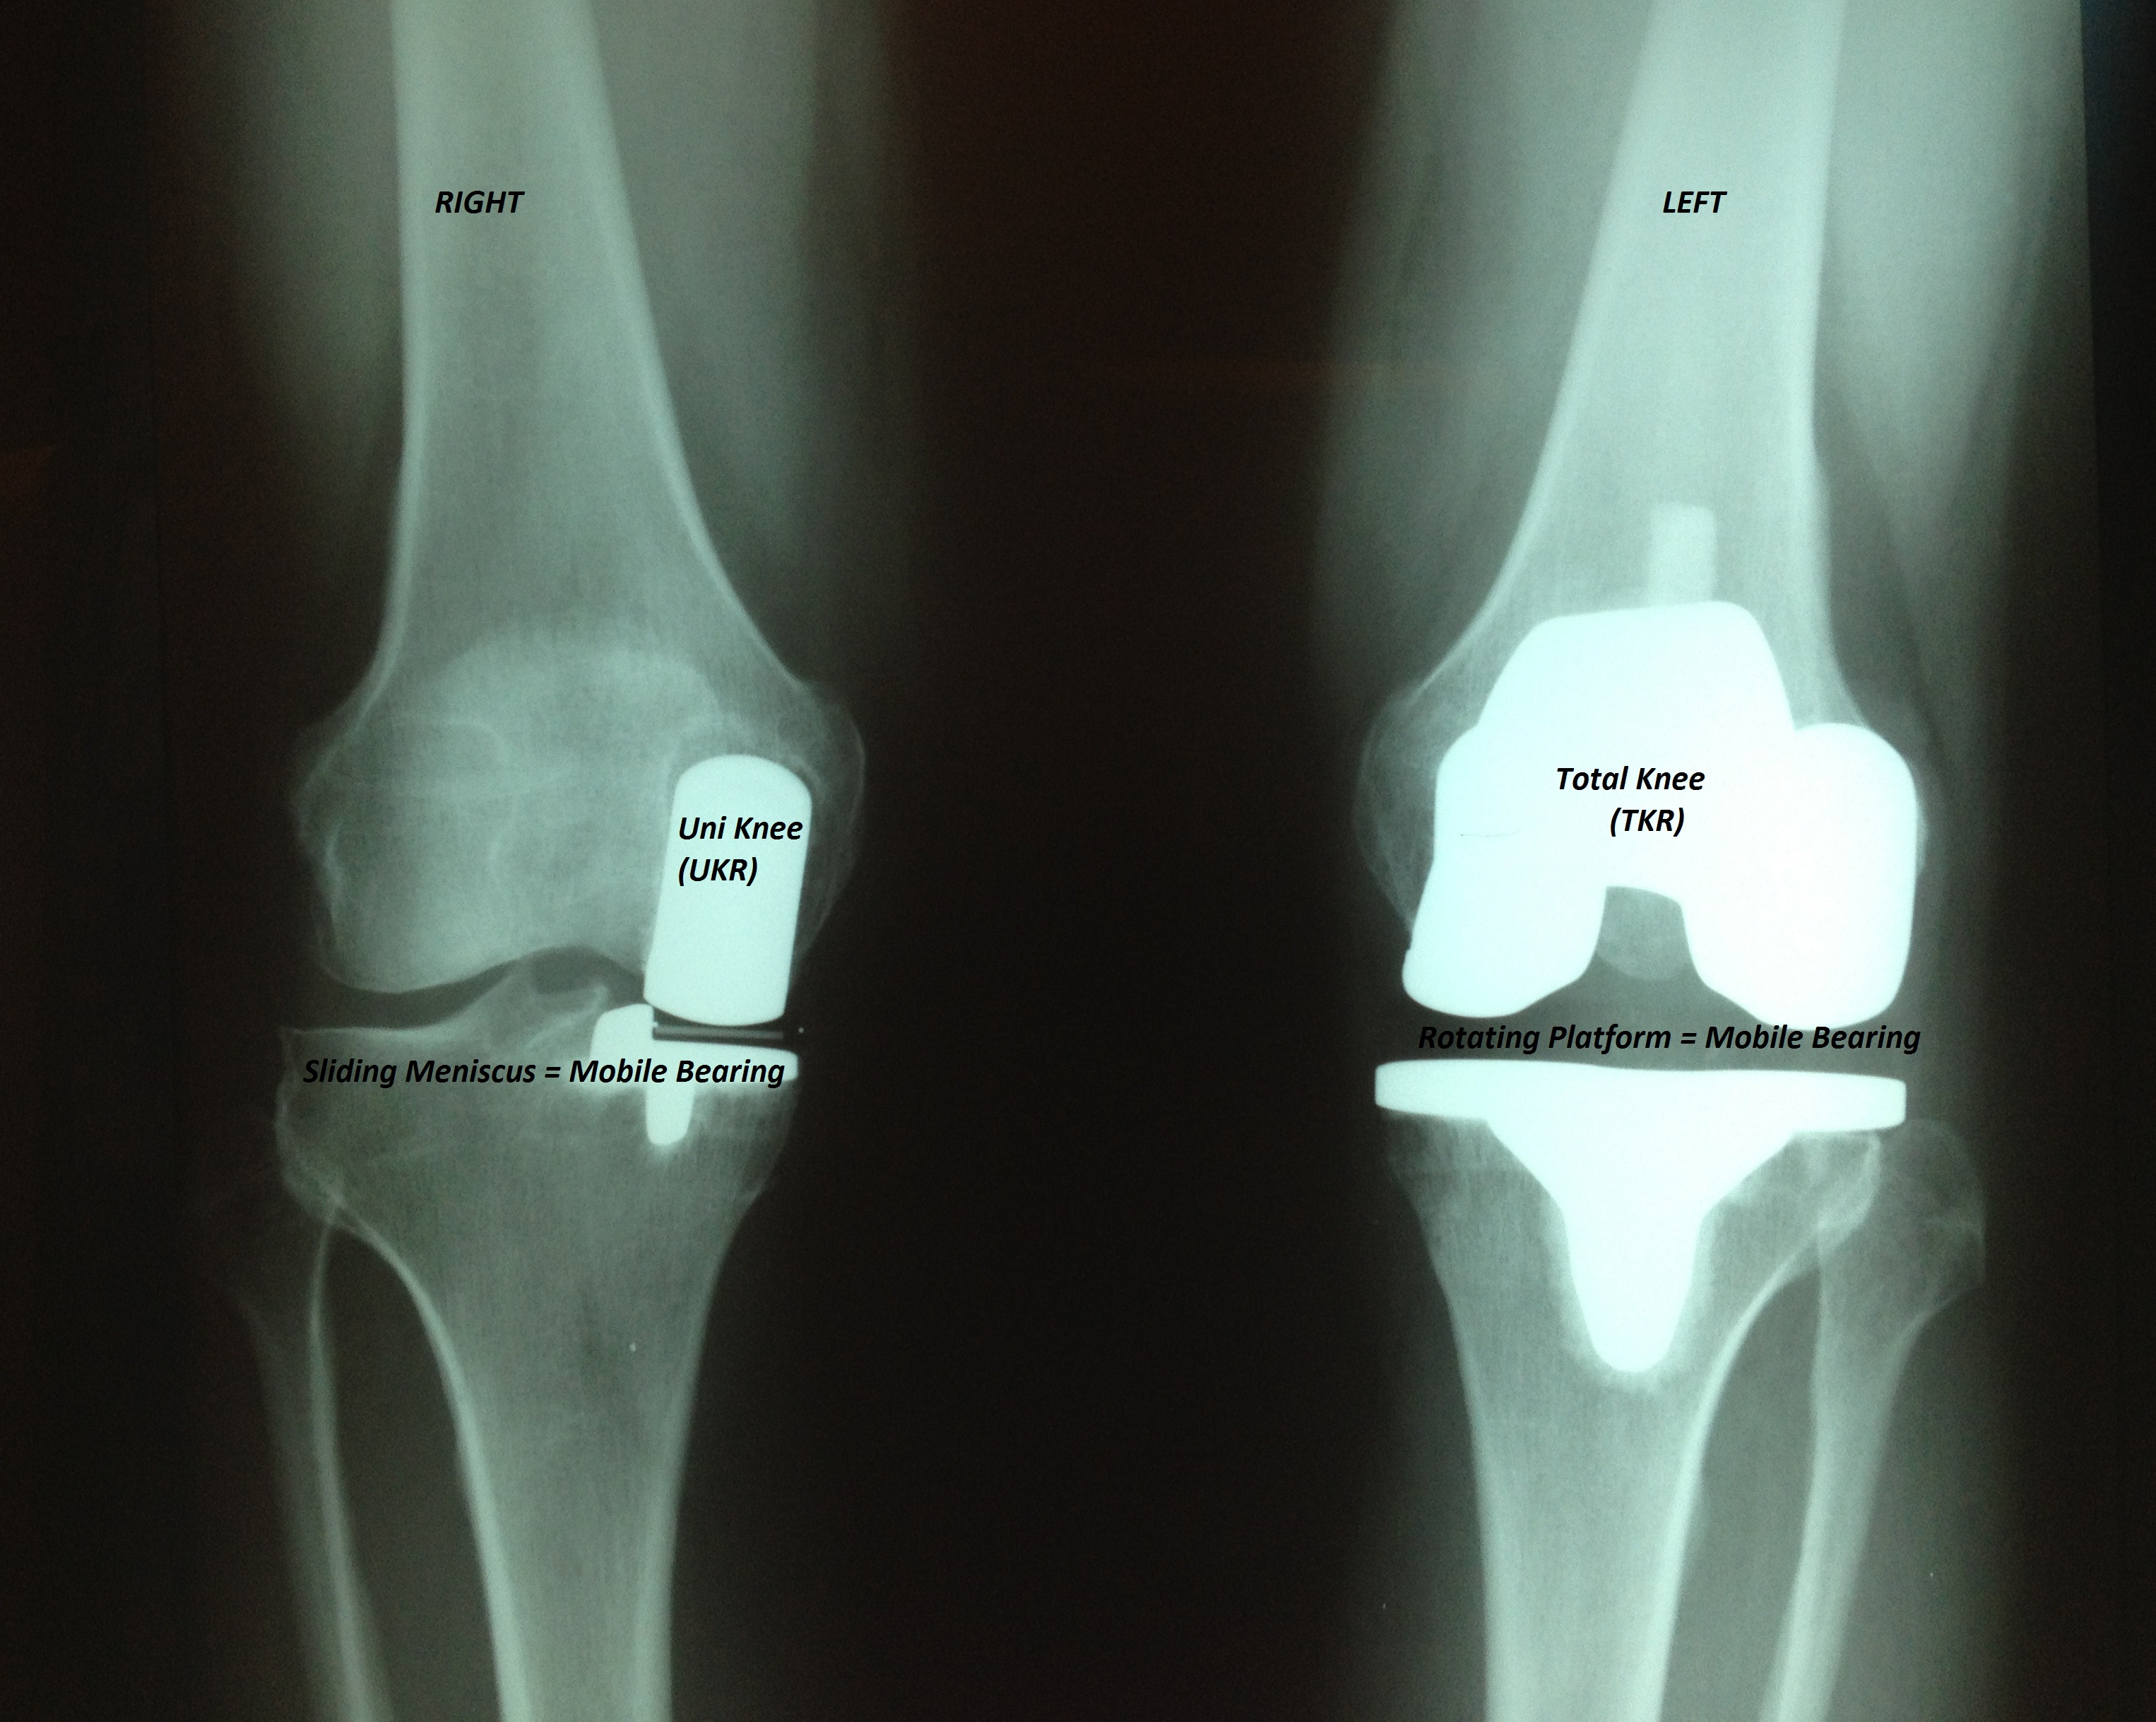 Advances in Knee Replacement.